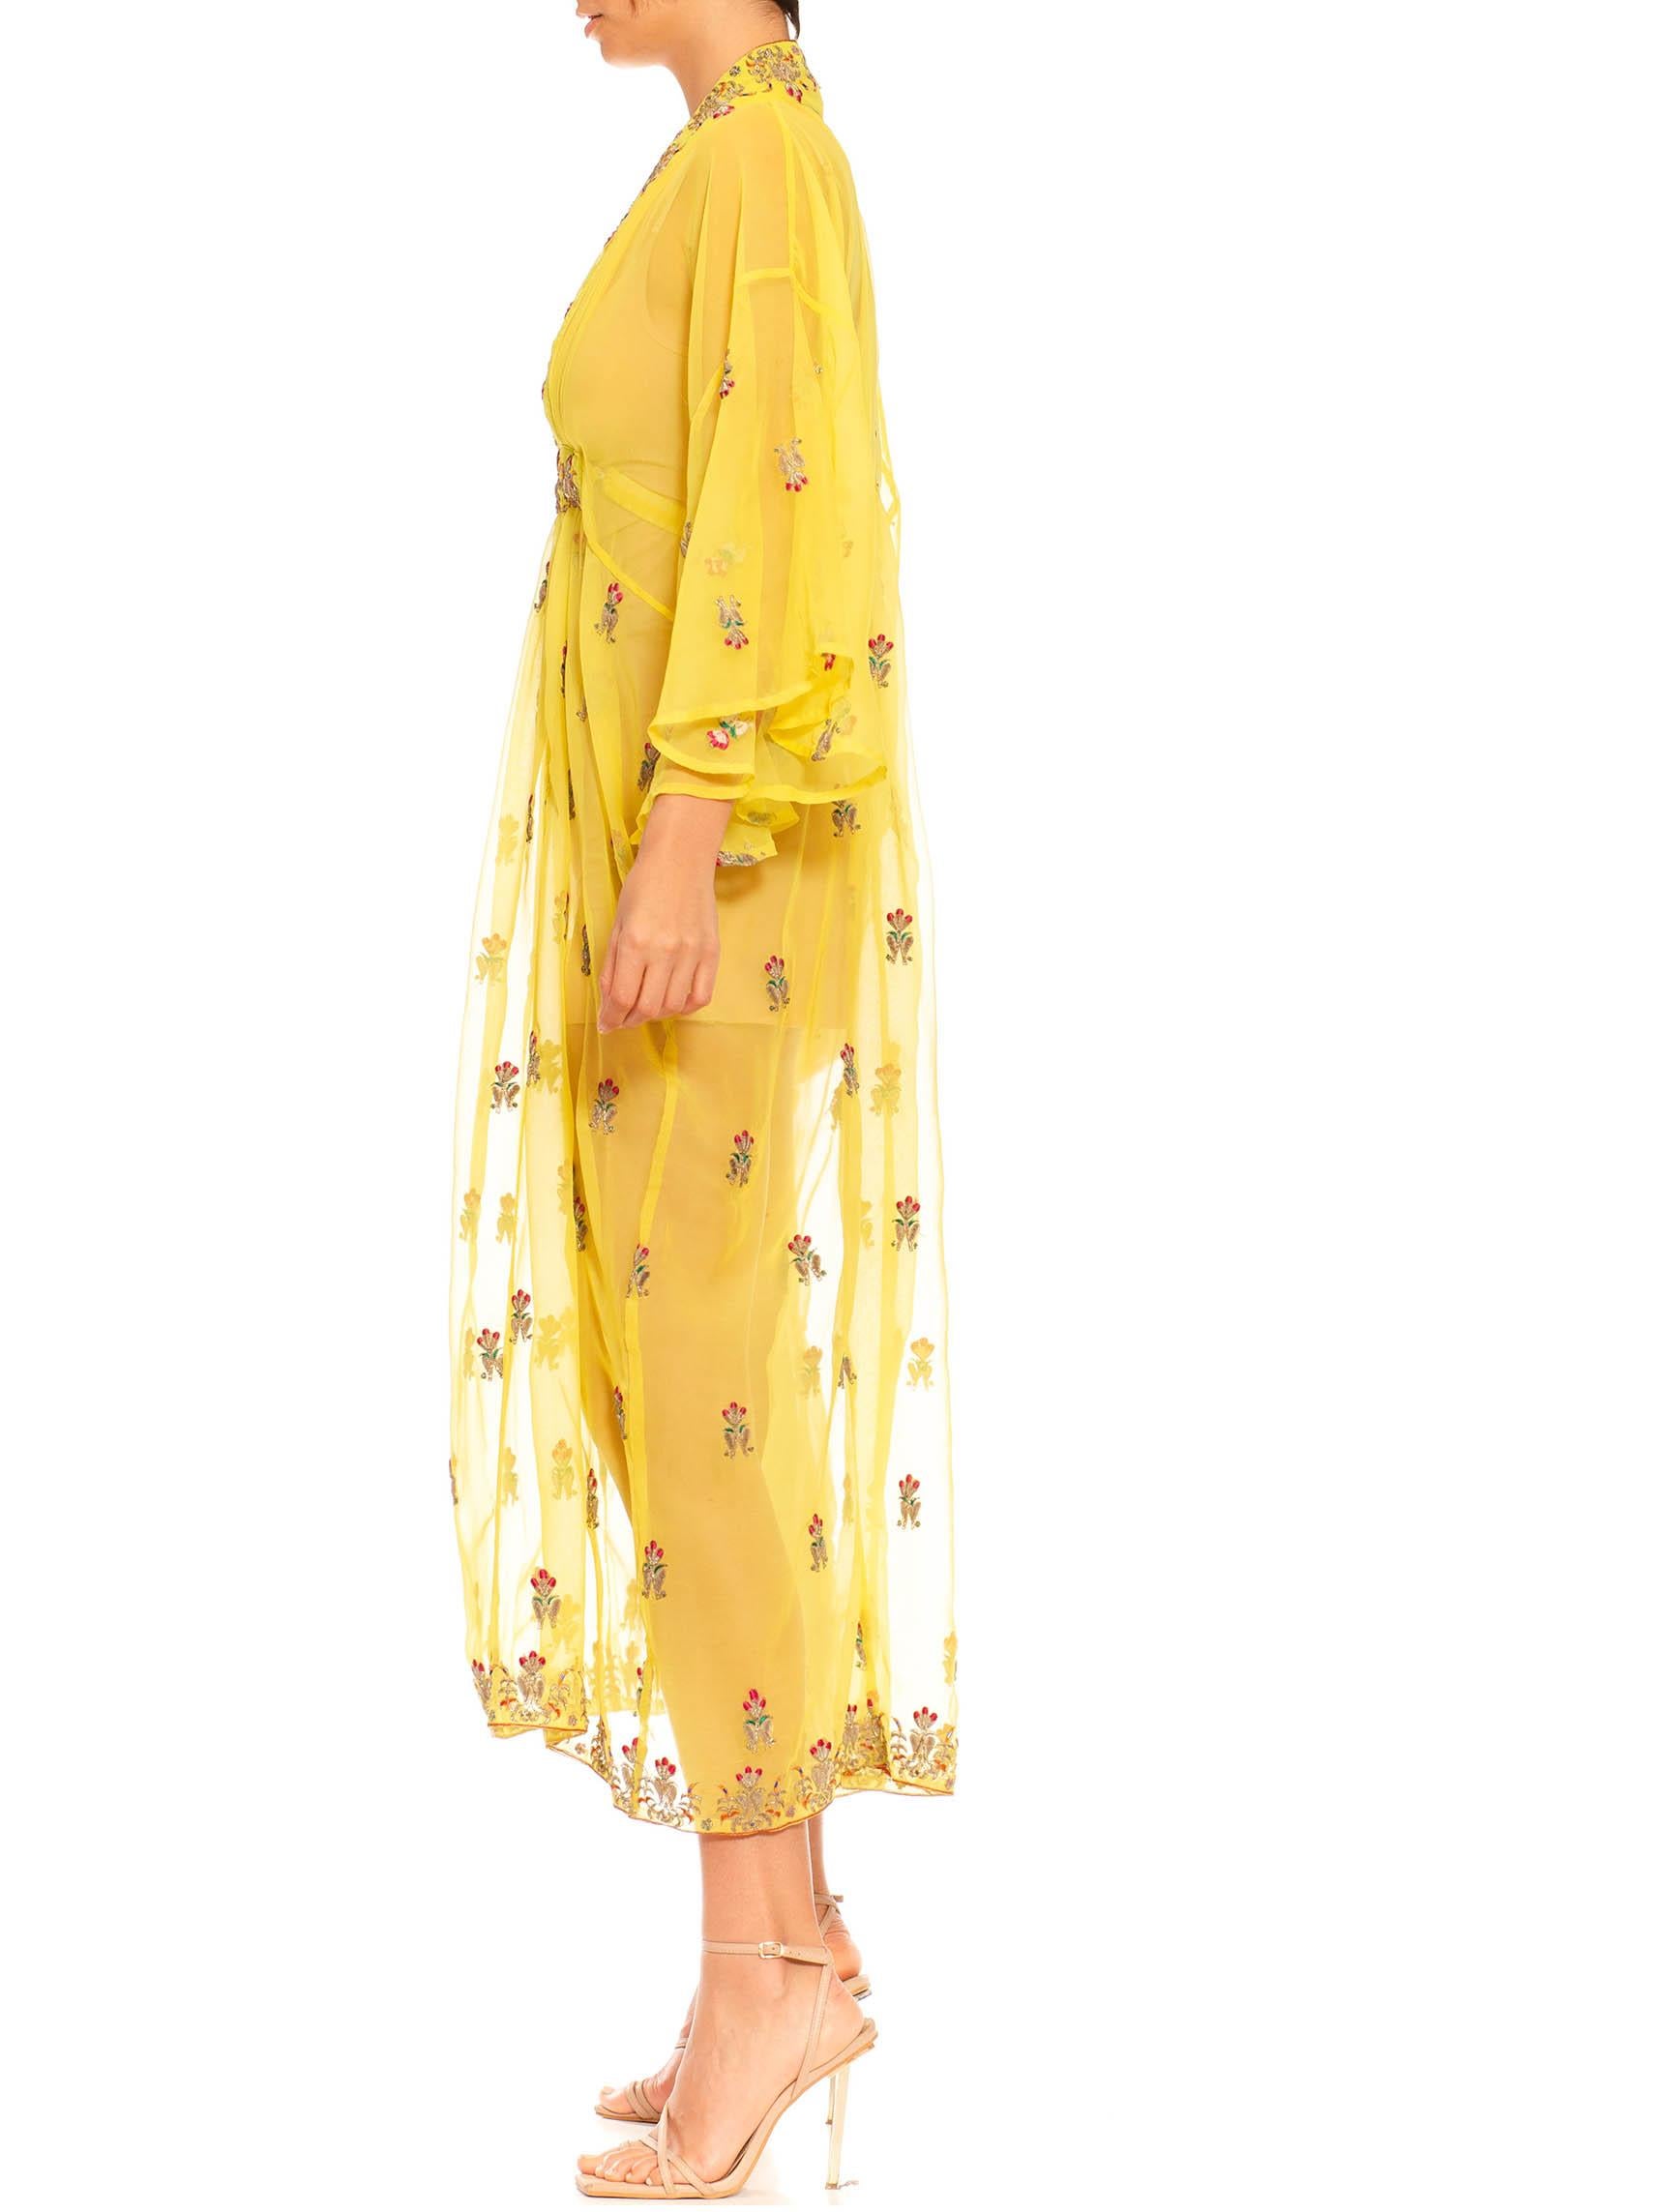 Morphew Collection Yellows & Gold Embroidered Silk Kaftan Made From Vintage Sar In Excellent Condition For Sale In New York, NY